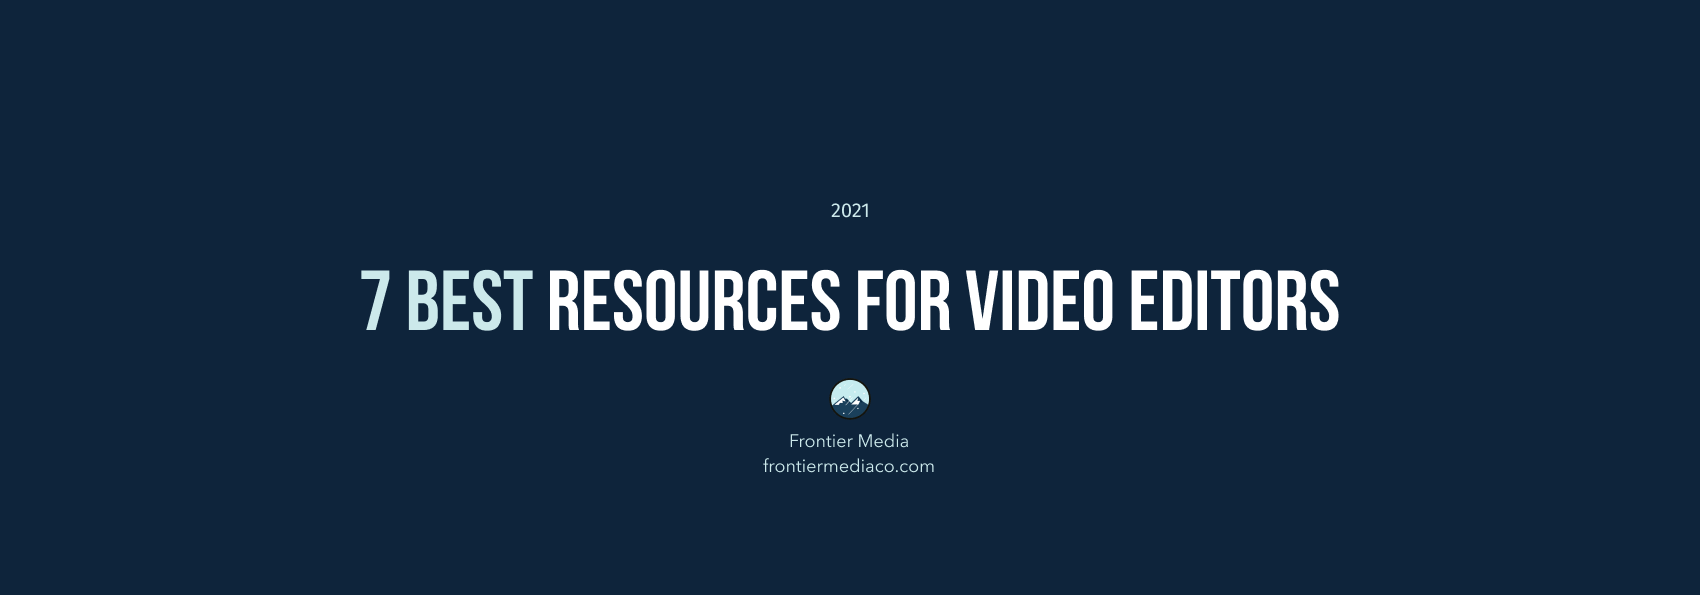 7 Best Resources for Video Editors